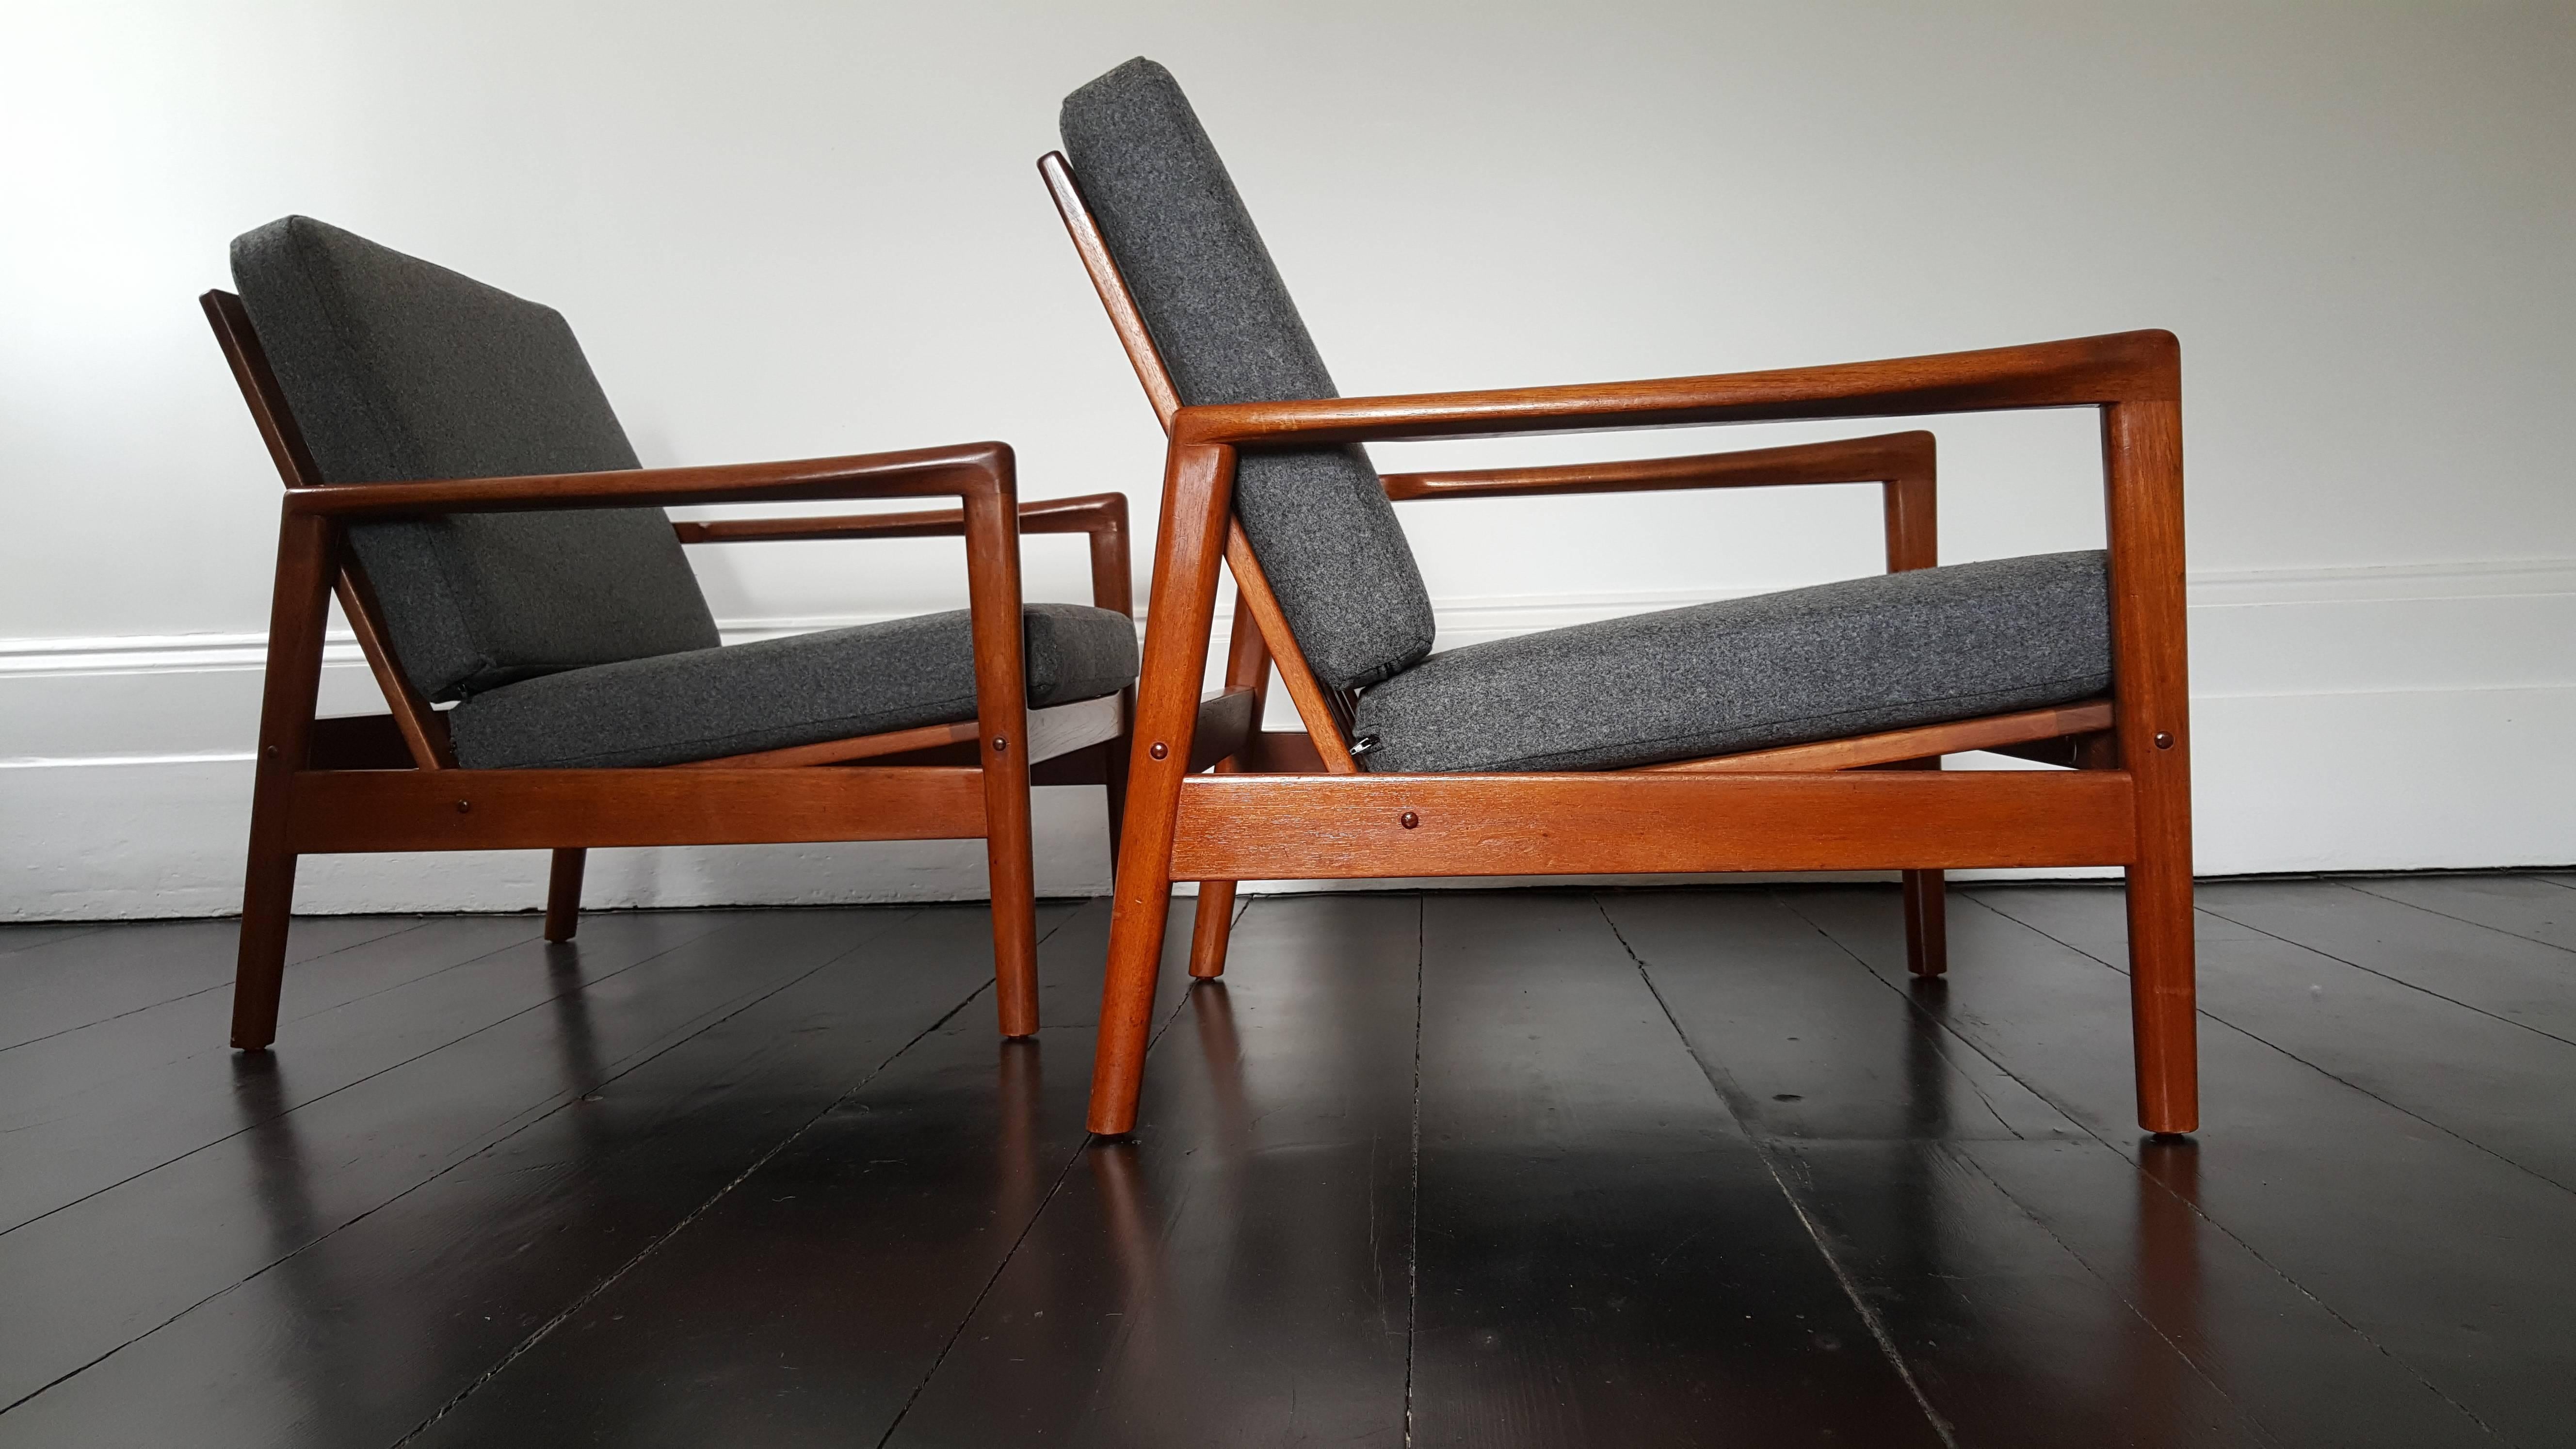 Hans Olsen lounge chairs for Juul Kristensen, 1960s.

A pair of solid teak lounge-chairs by Hans Olsen - beautifully shaped arms.

Newly upholstered in Abraham & Moon upholstery.